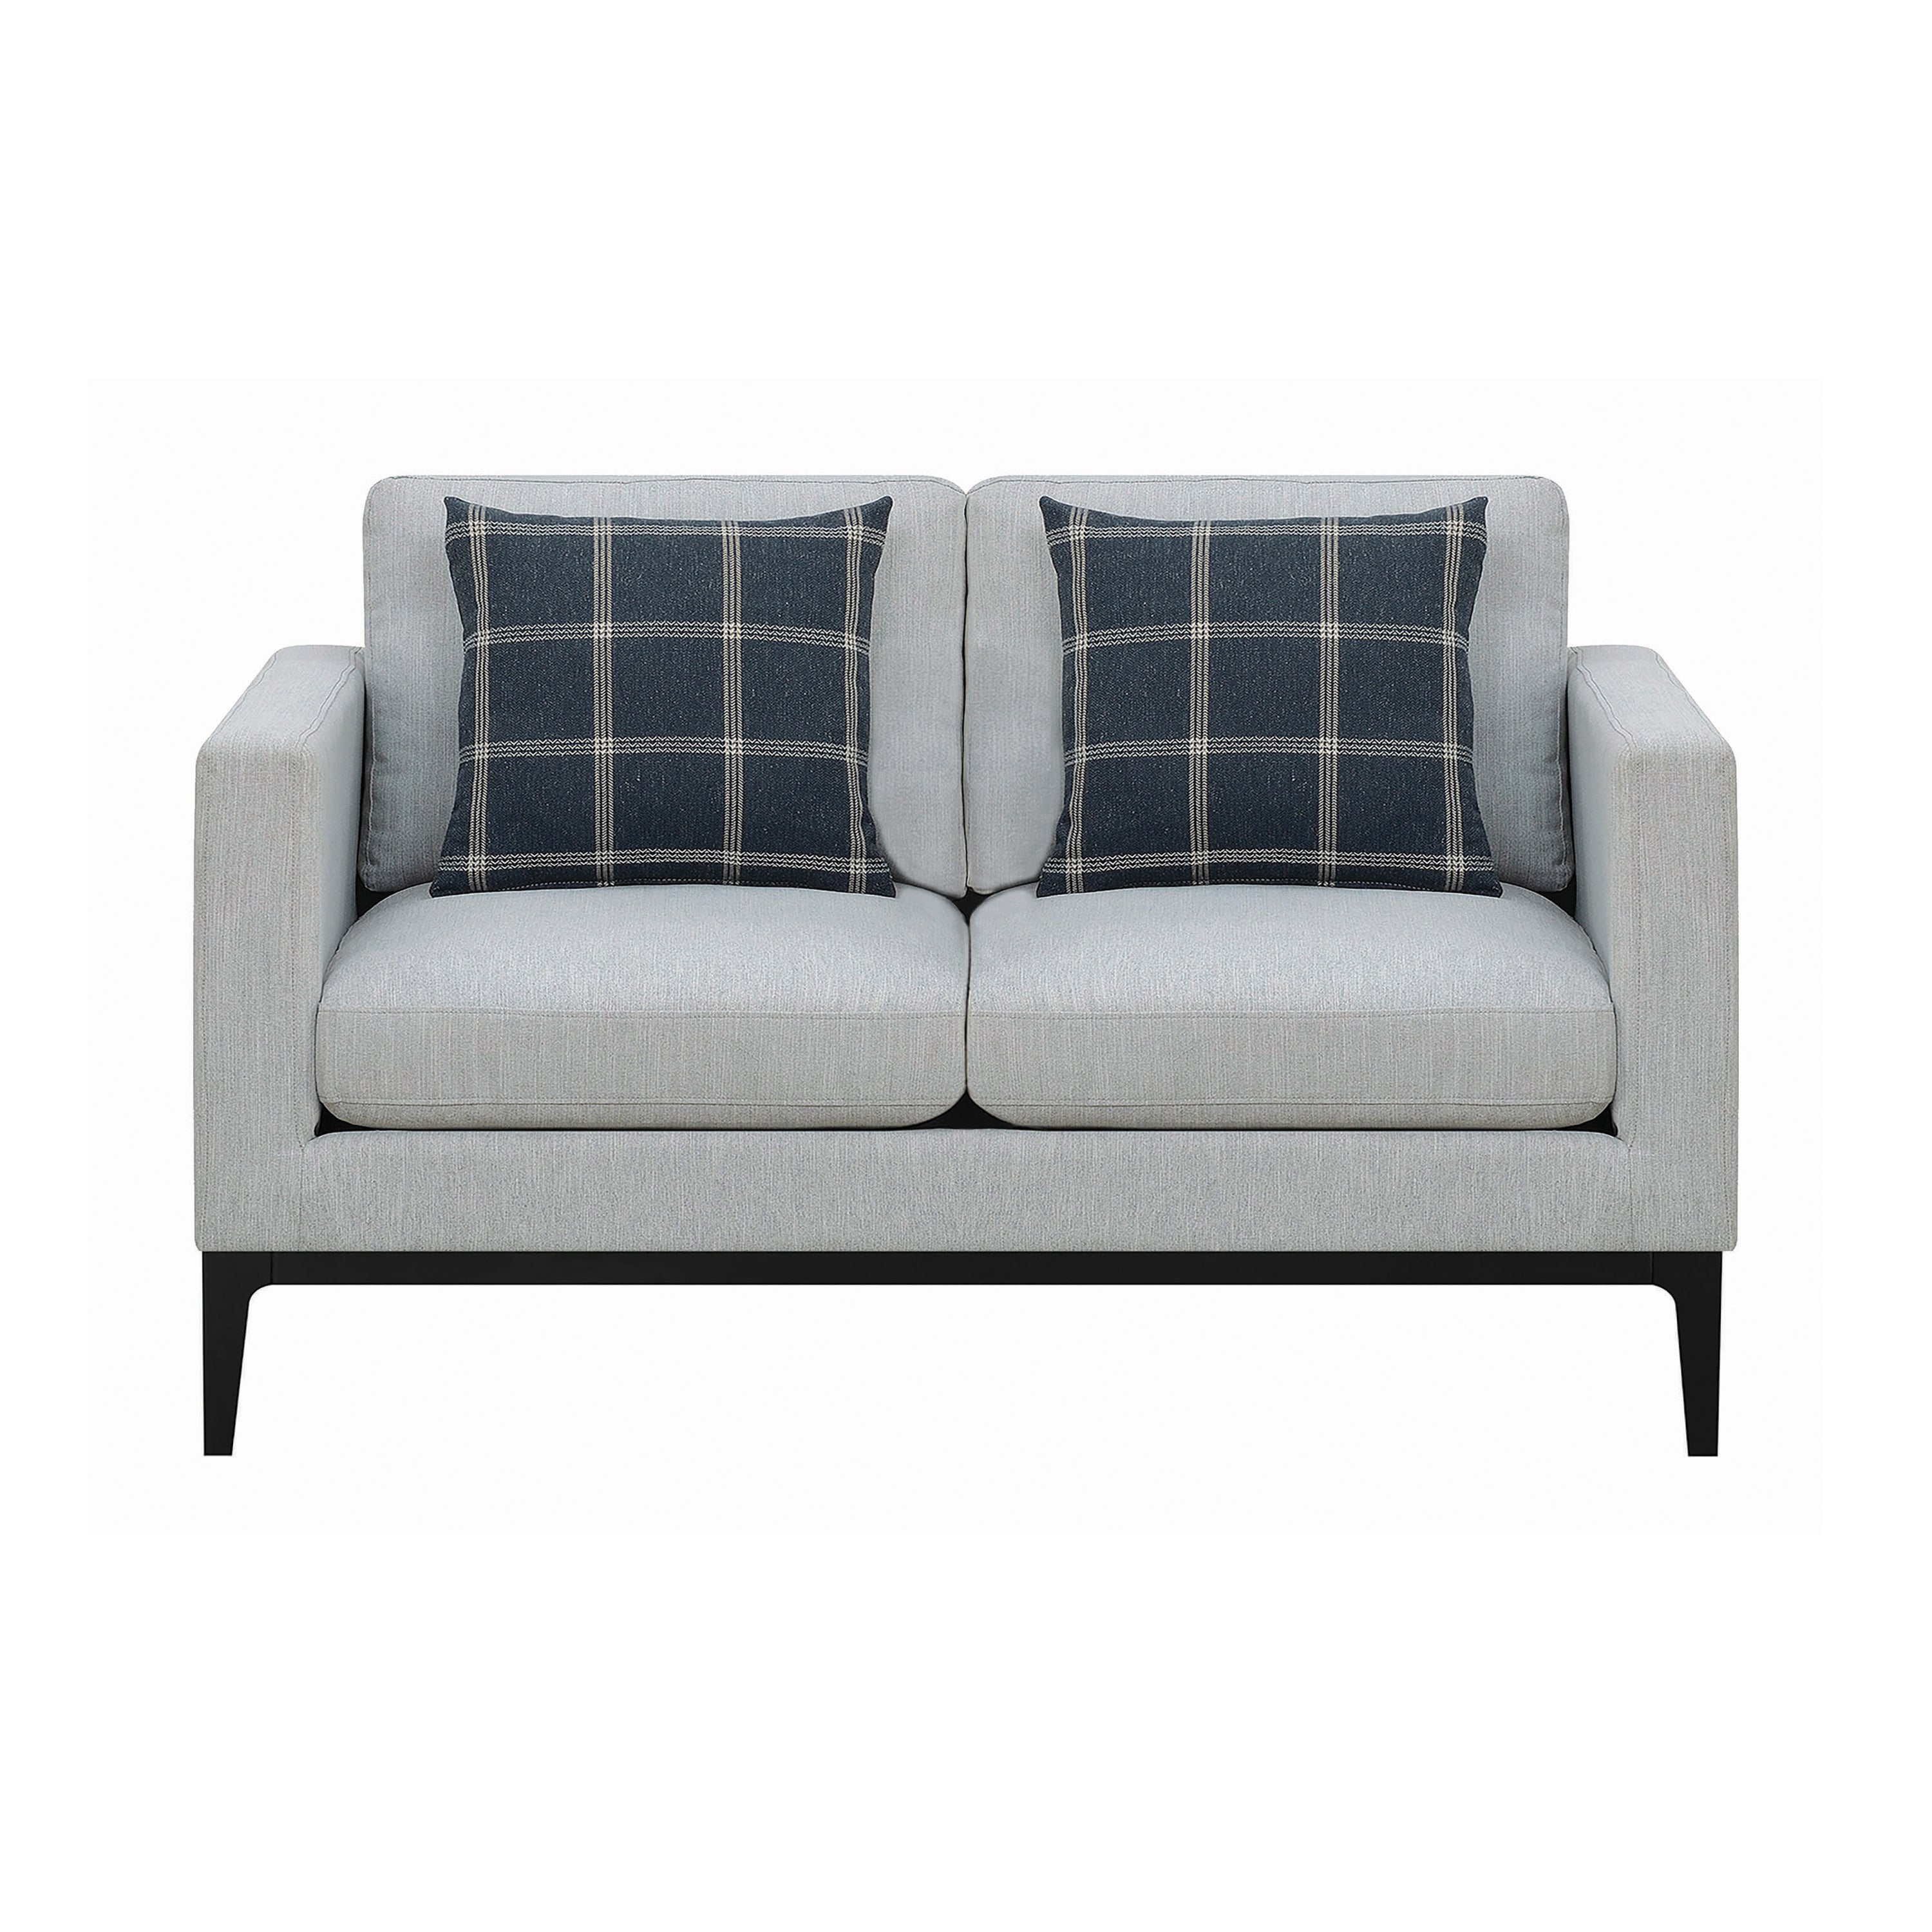 Apperson Collection Loveseat - Grey